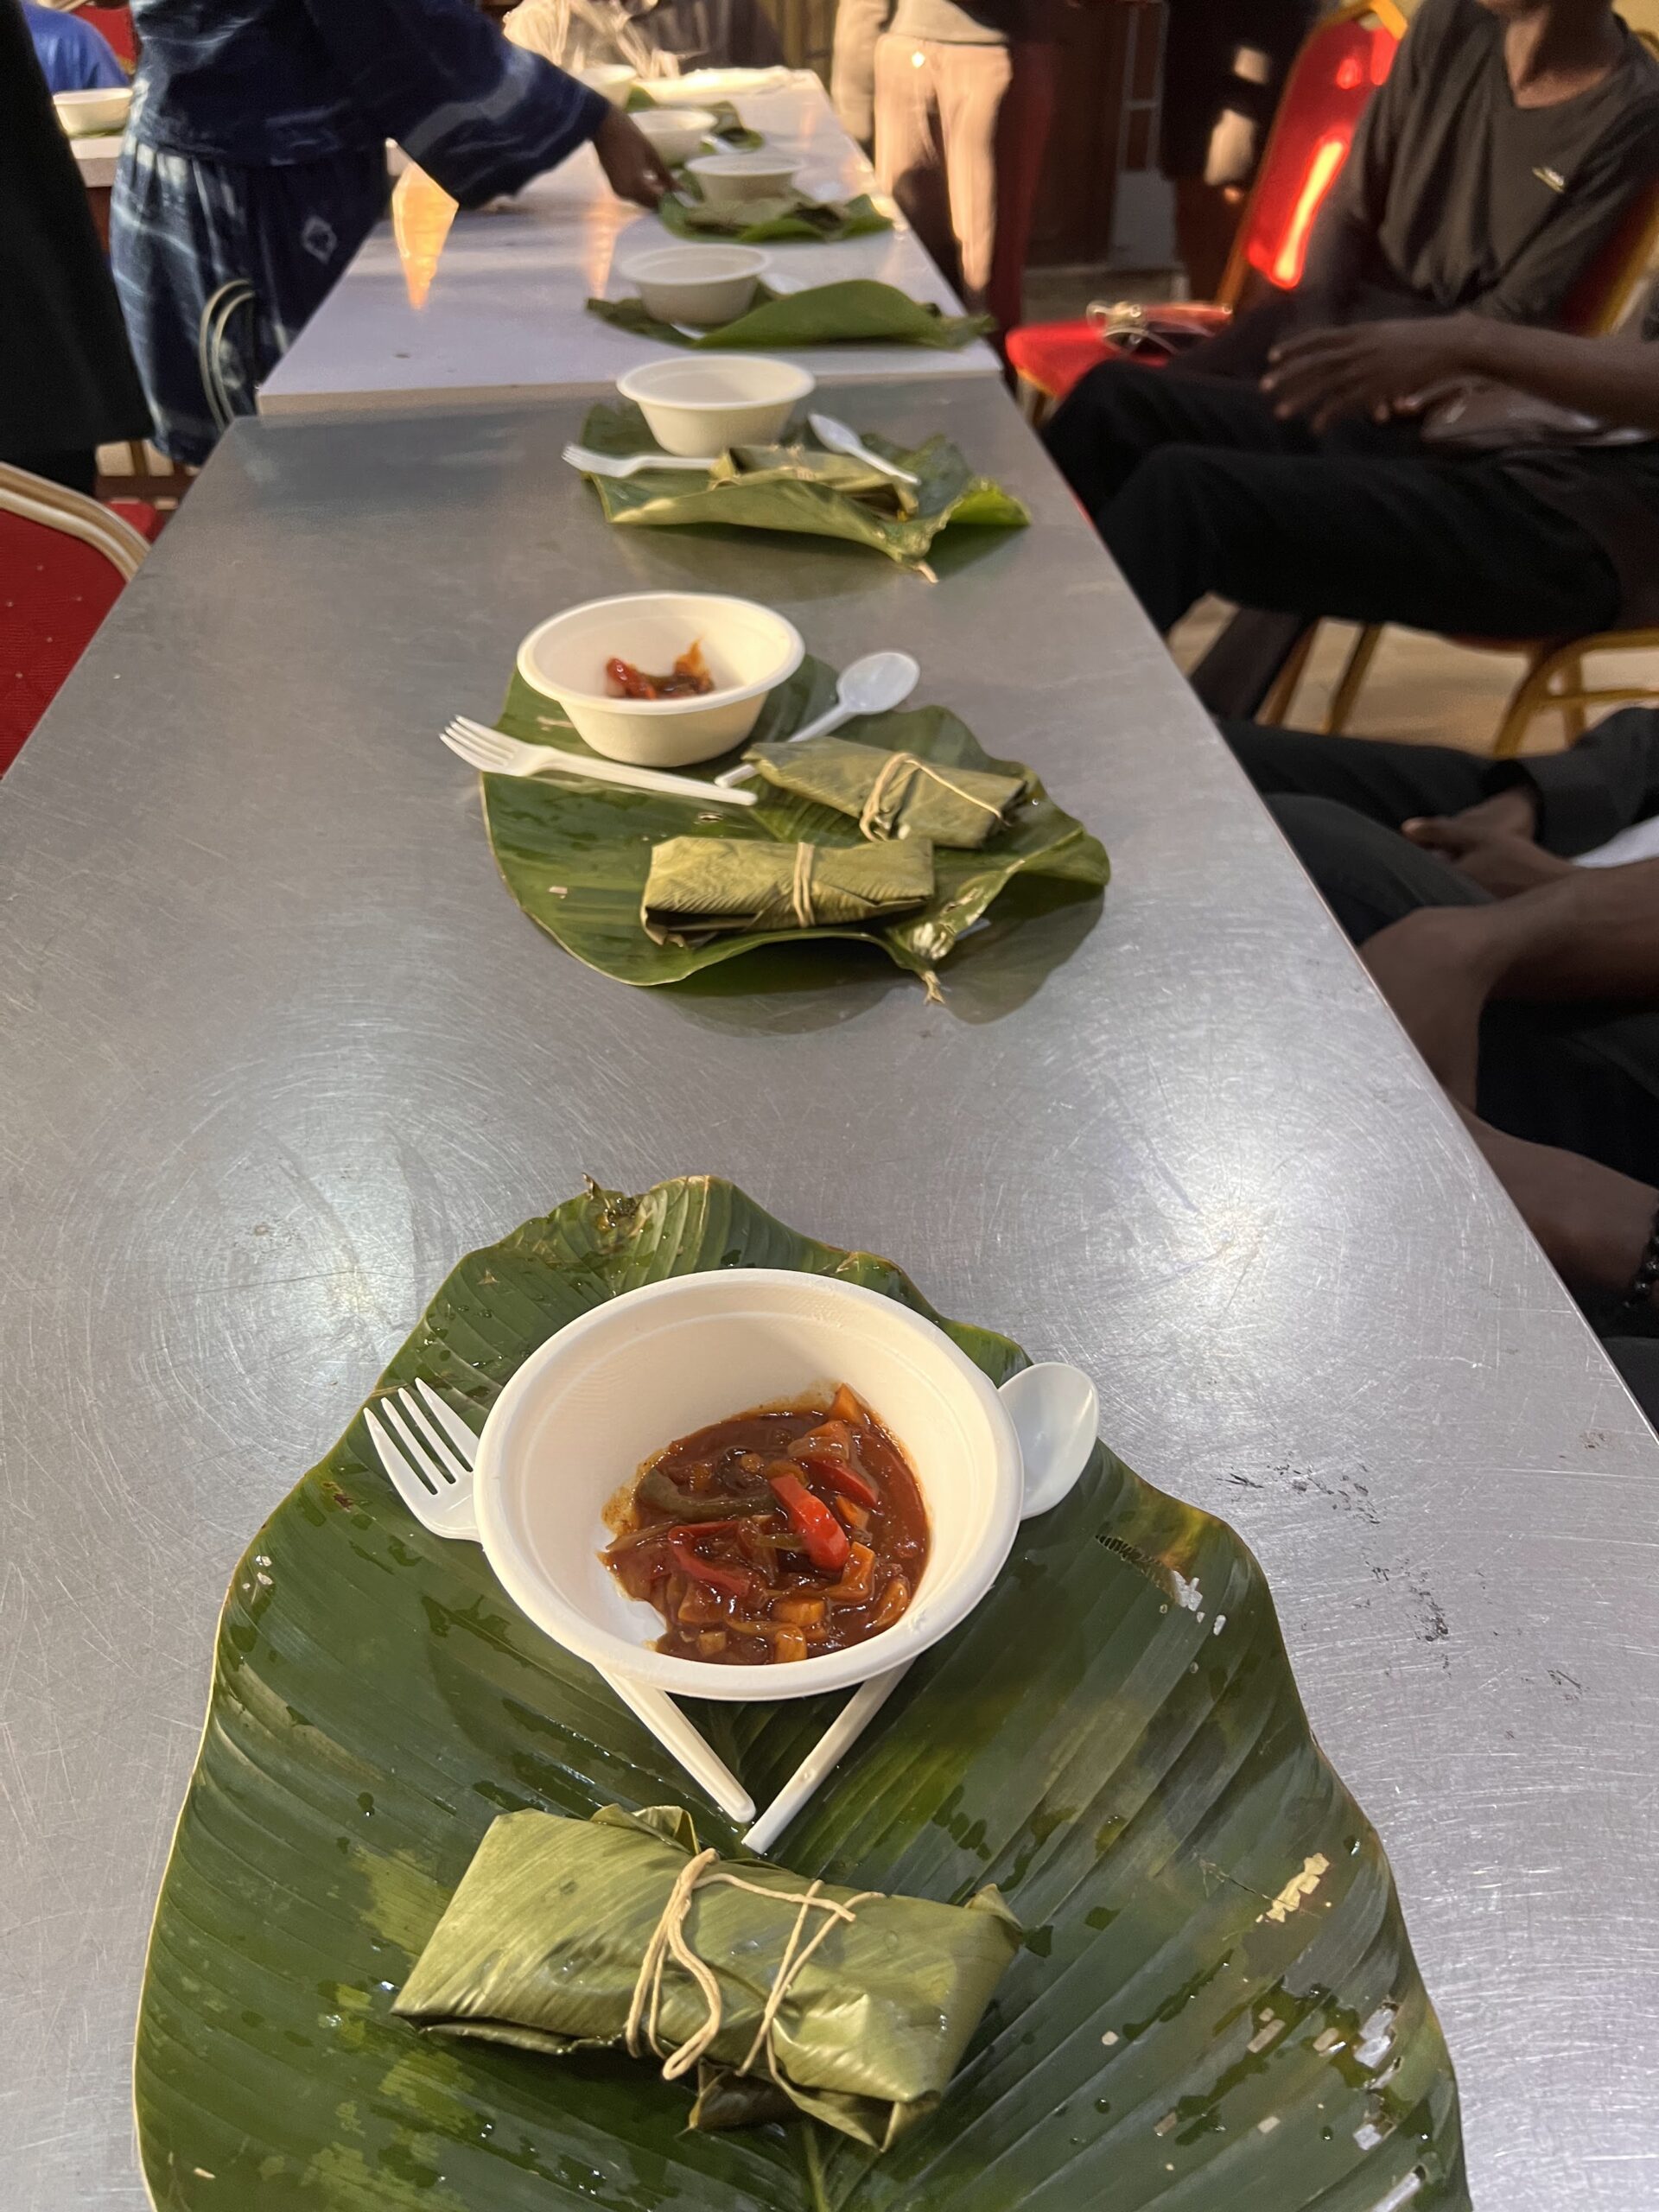 A long table with set with banana leaves, with a wrapped cinavu on top as well as sauce and a fork and spoon.